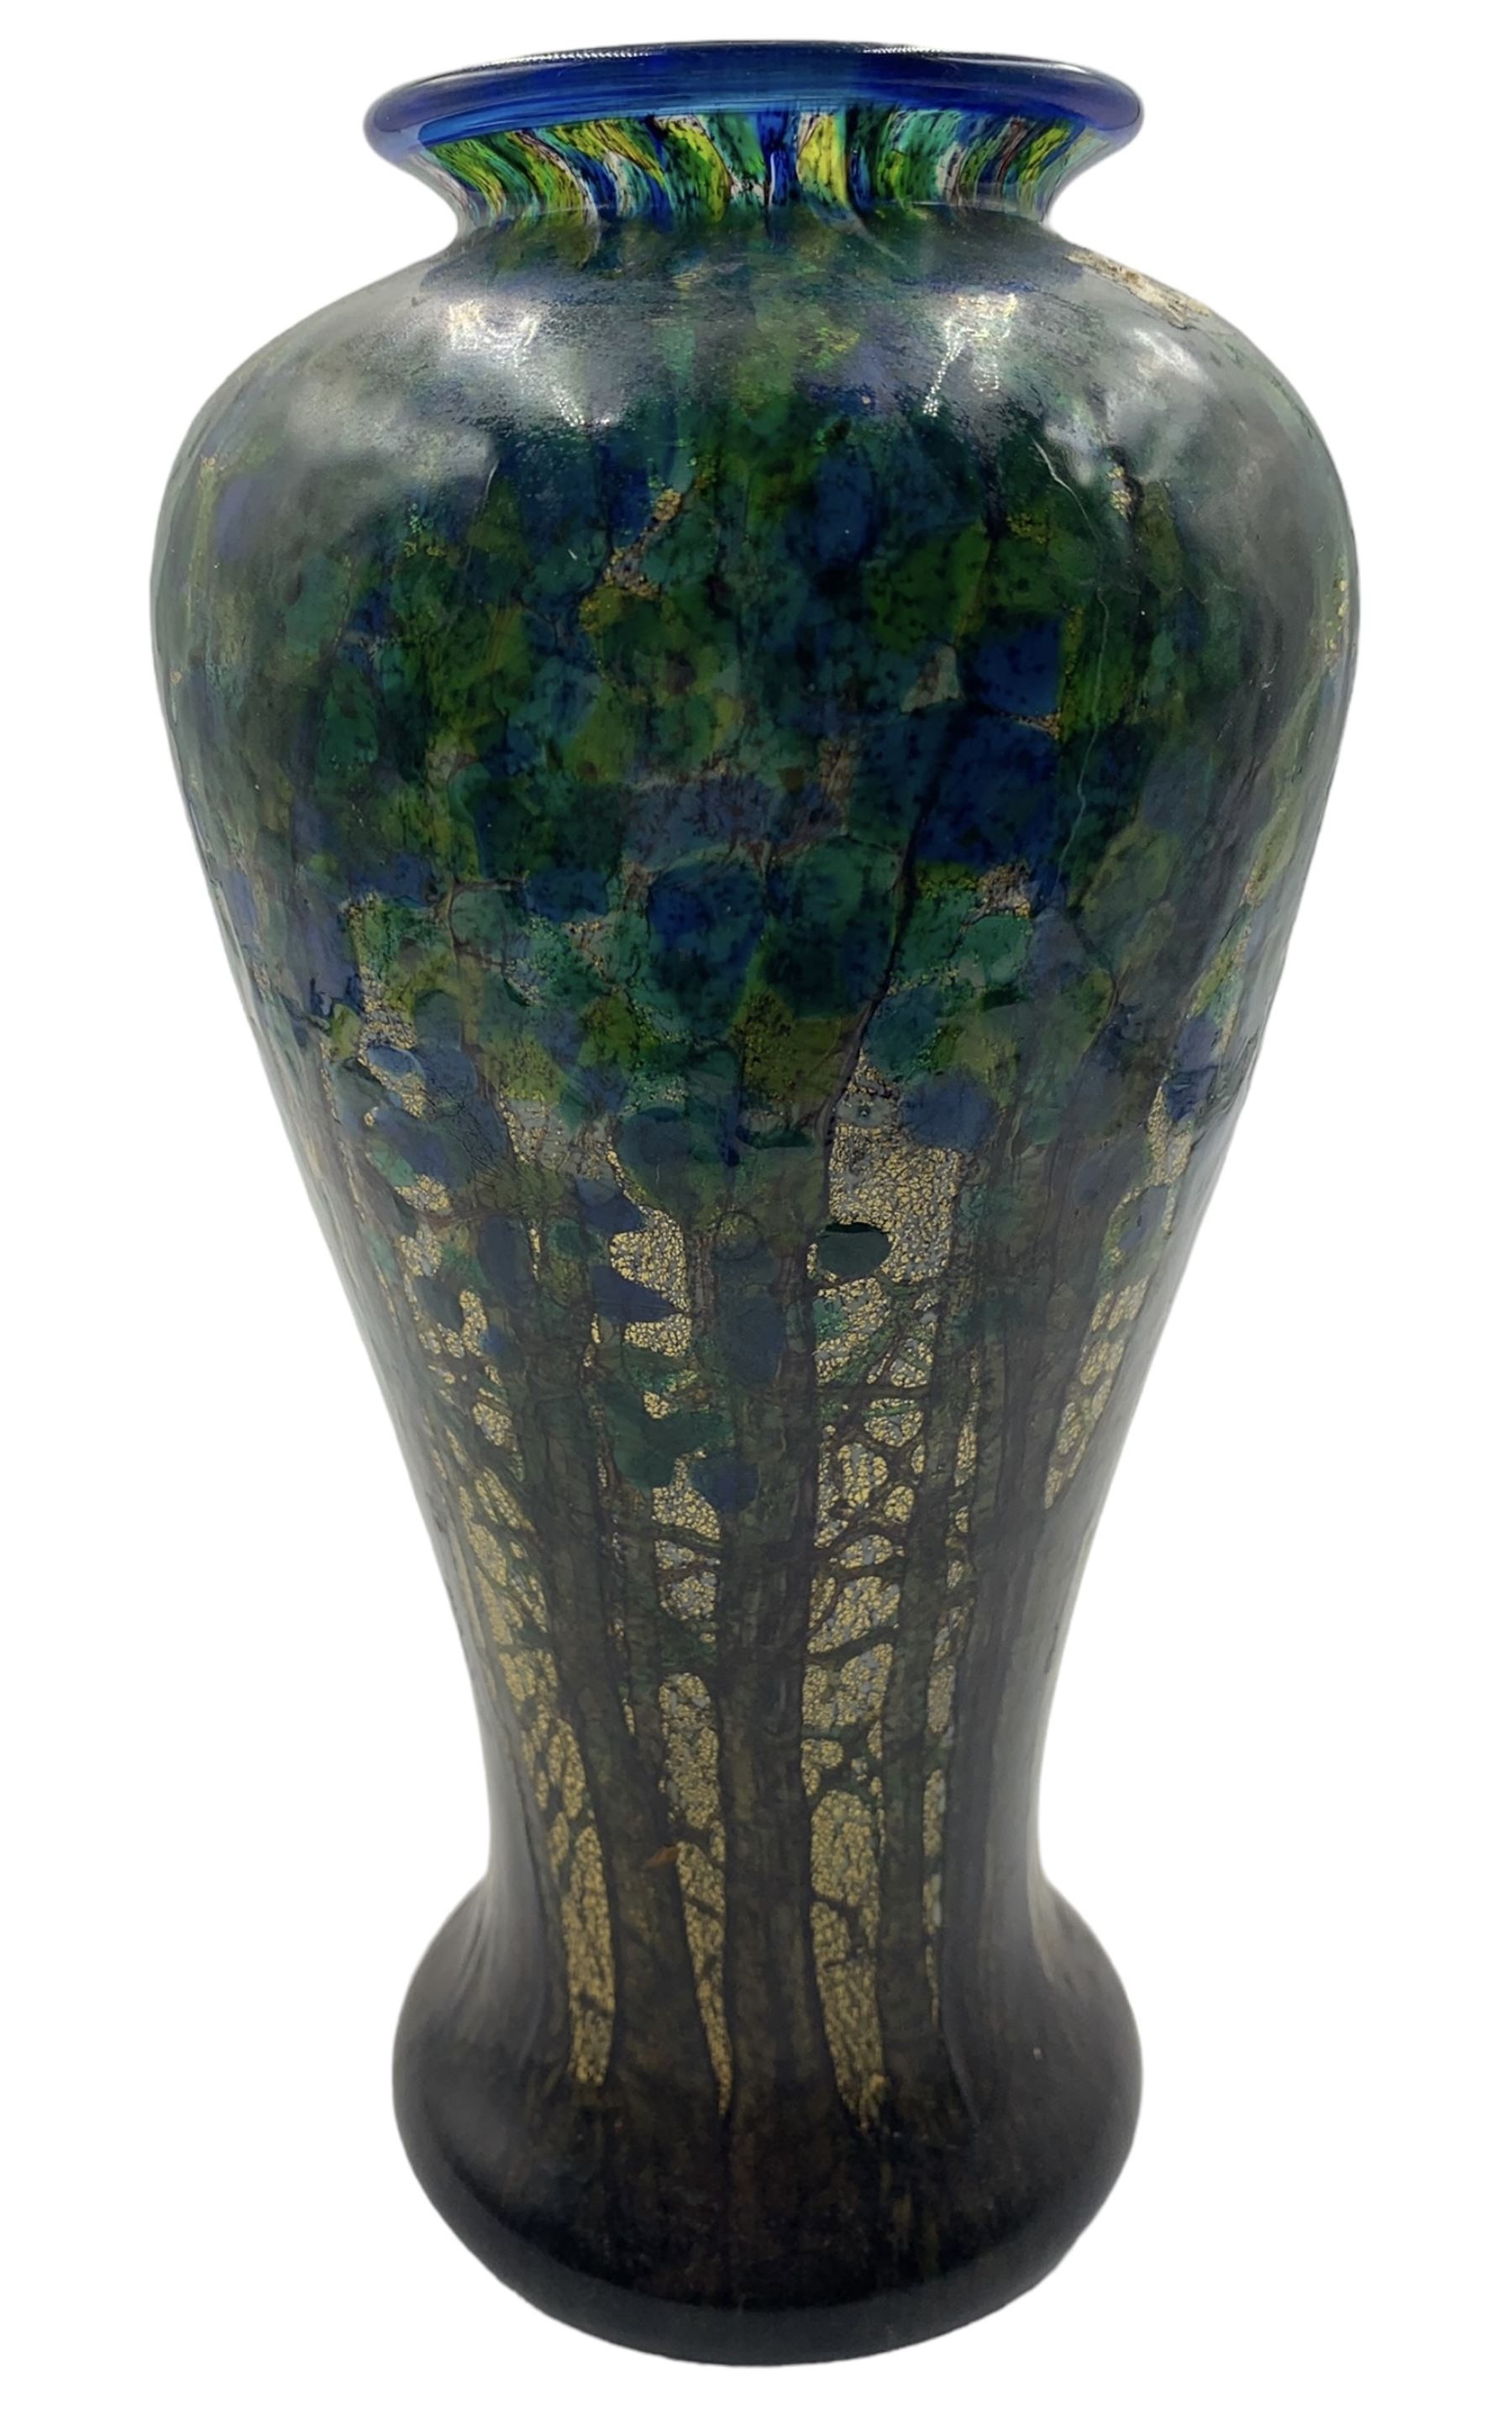 Isle of Wight glass vase by Timothy Harris - Image 4 of 5